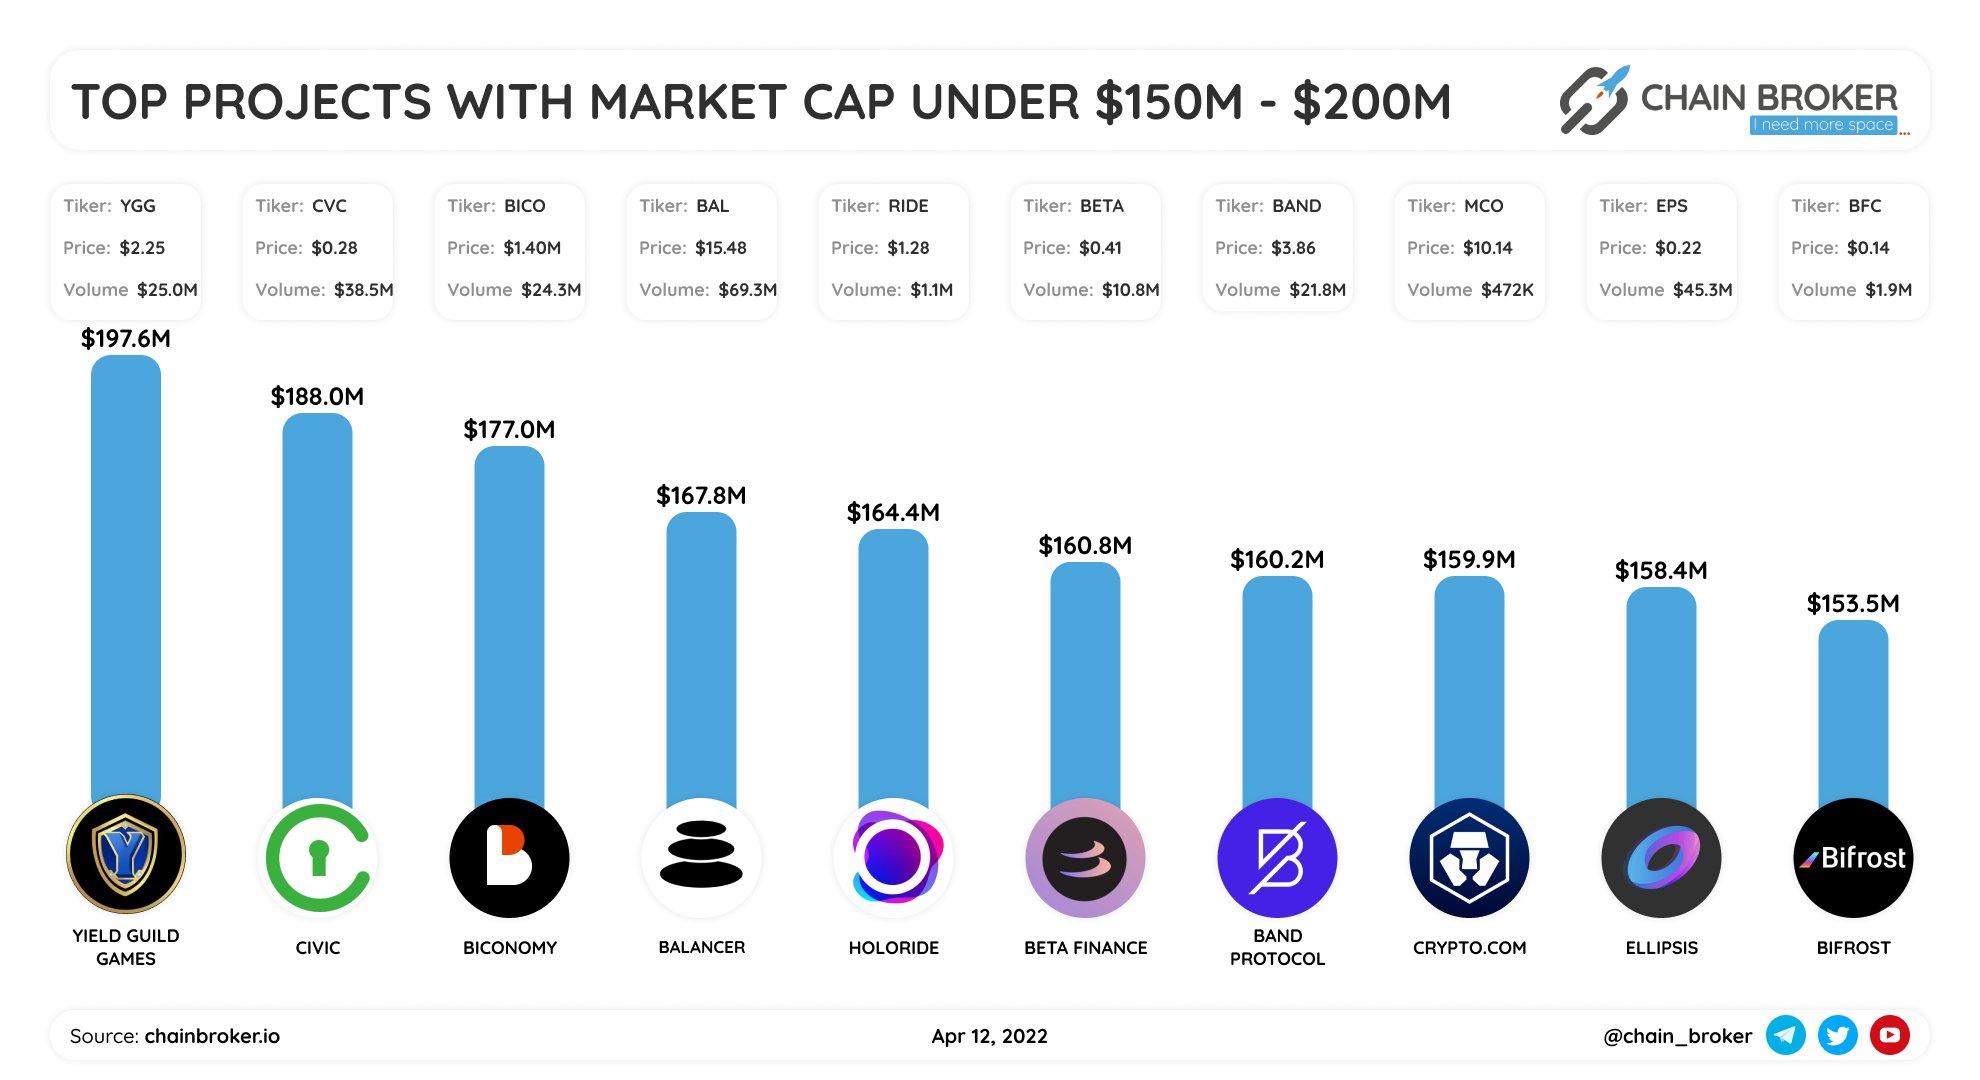 Top project with market cap $150M - $200M